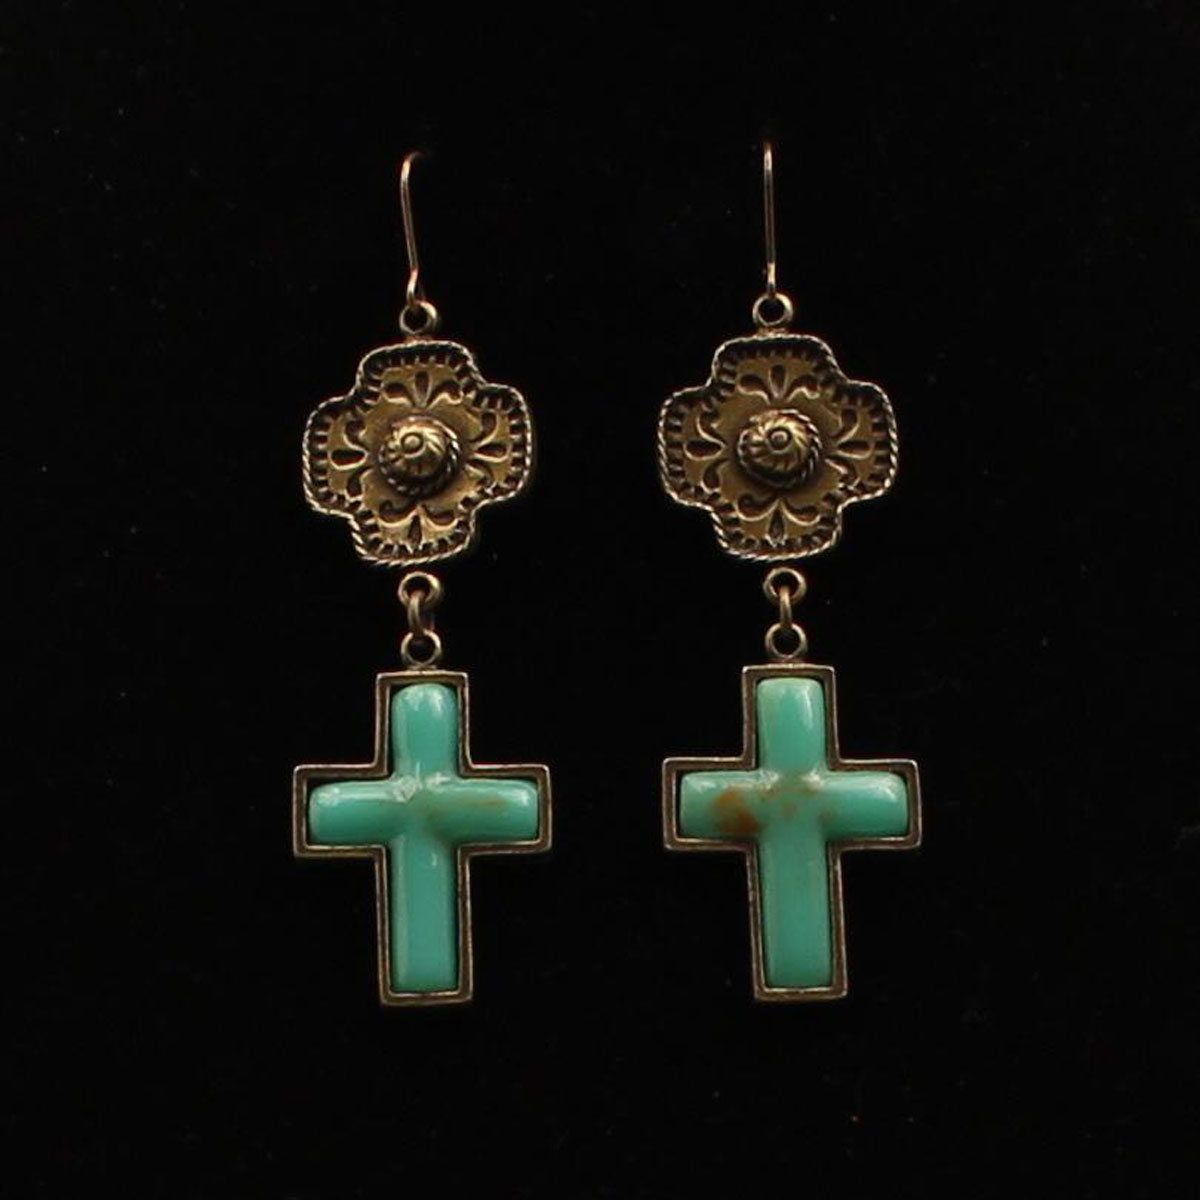 Dbue21013 Antique Gold & Turquoise Inlay Crystal Earrings